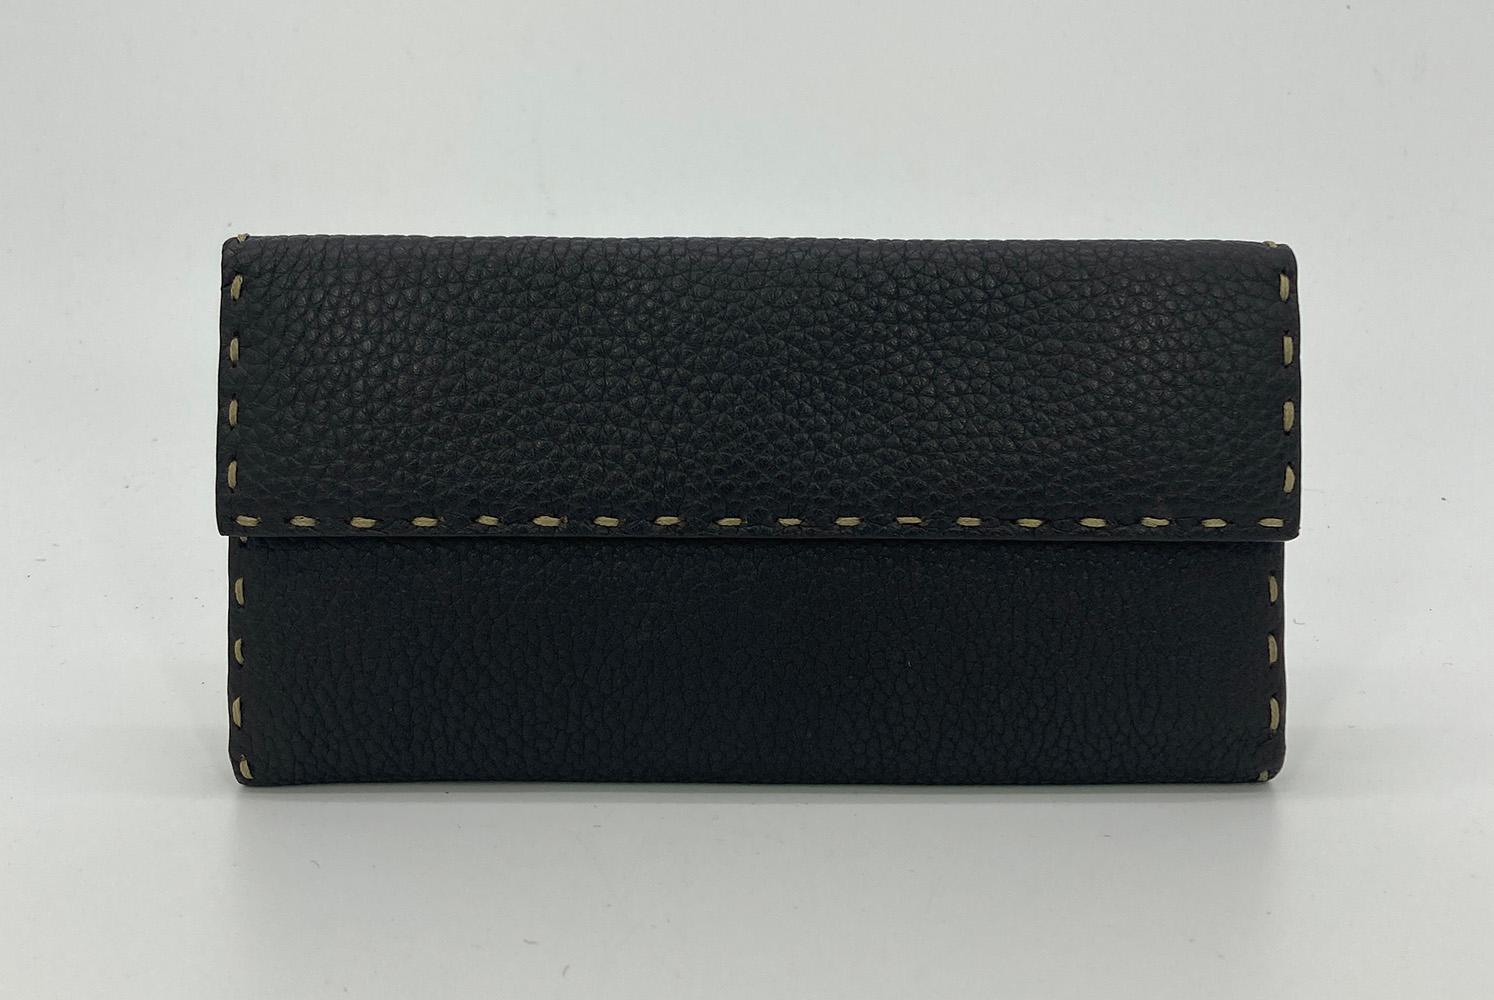 Fendi Dark Brown Leather Continental Wallet in very good condition. Dark Brown Selleria leather with cream top stitching around edges. Front snap closure opens via double fold to a brown leather interior with clear frosted id pocket, 2 larger slit